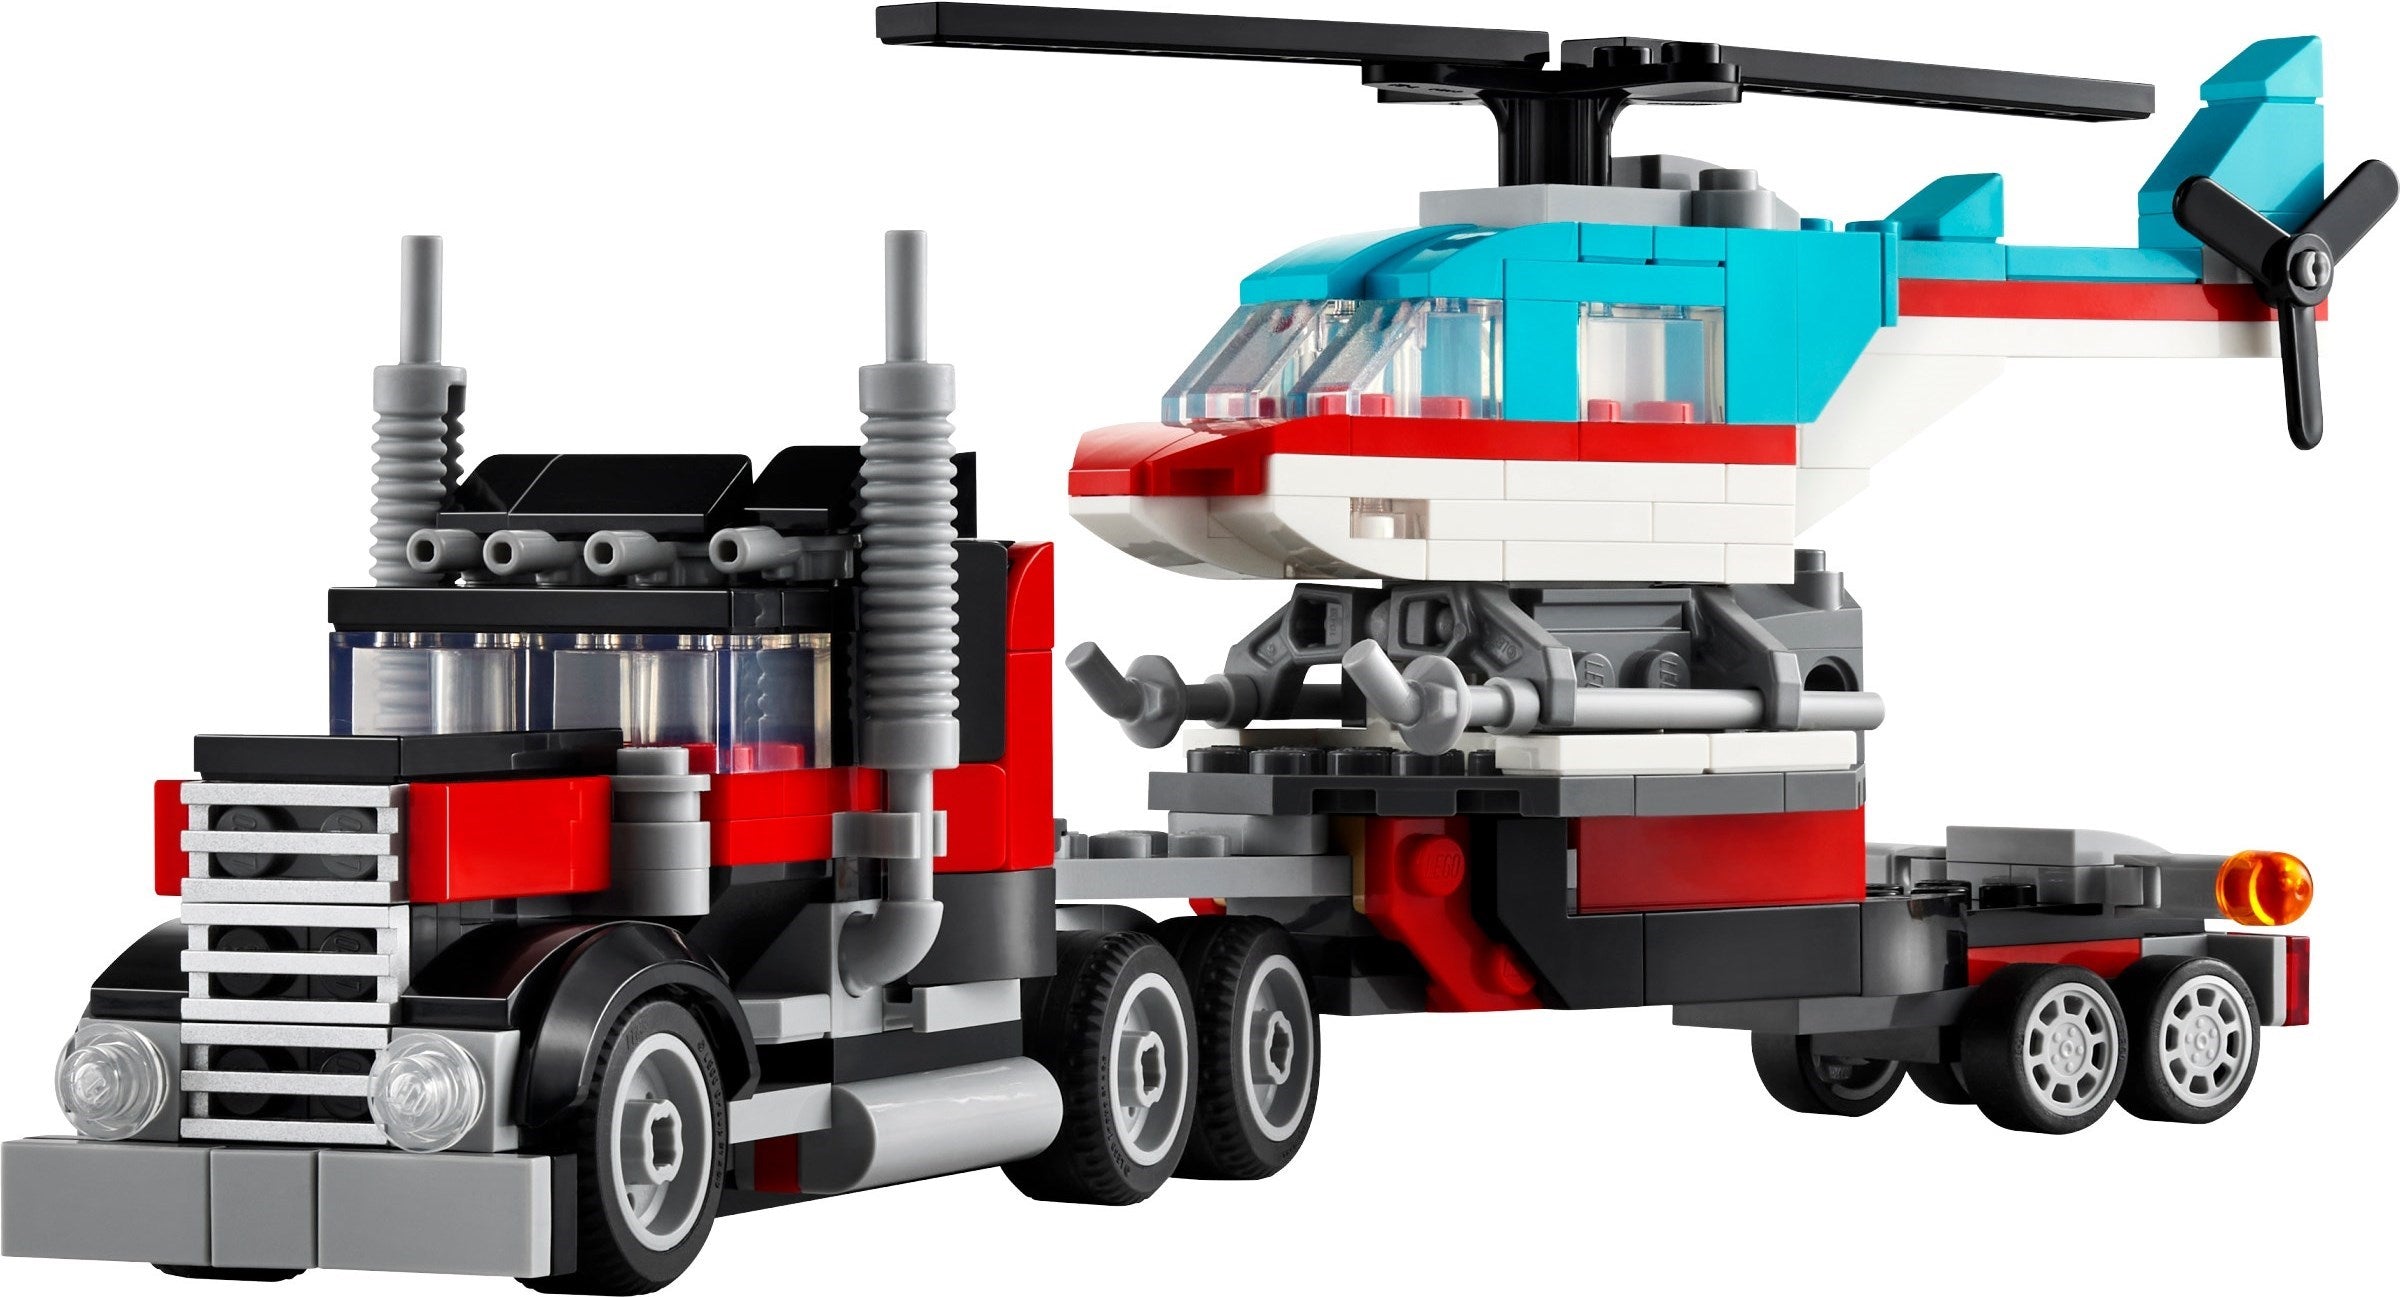 LEGO 31146 Flatbed Truck with Helicopter